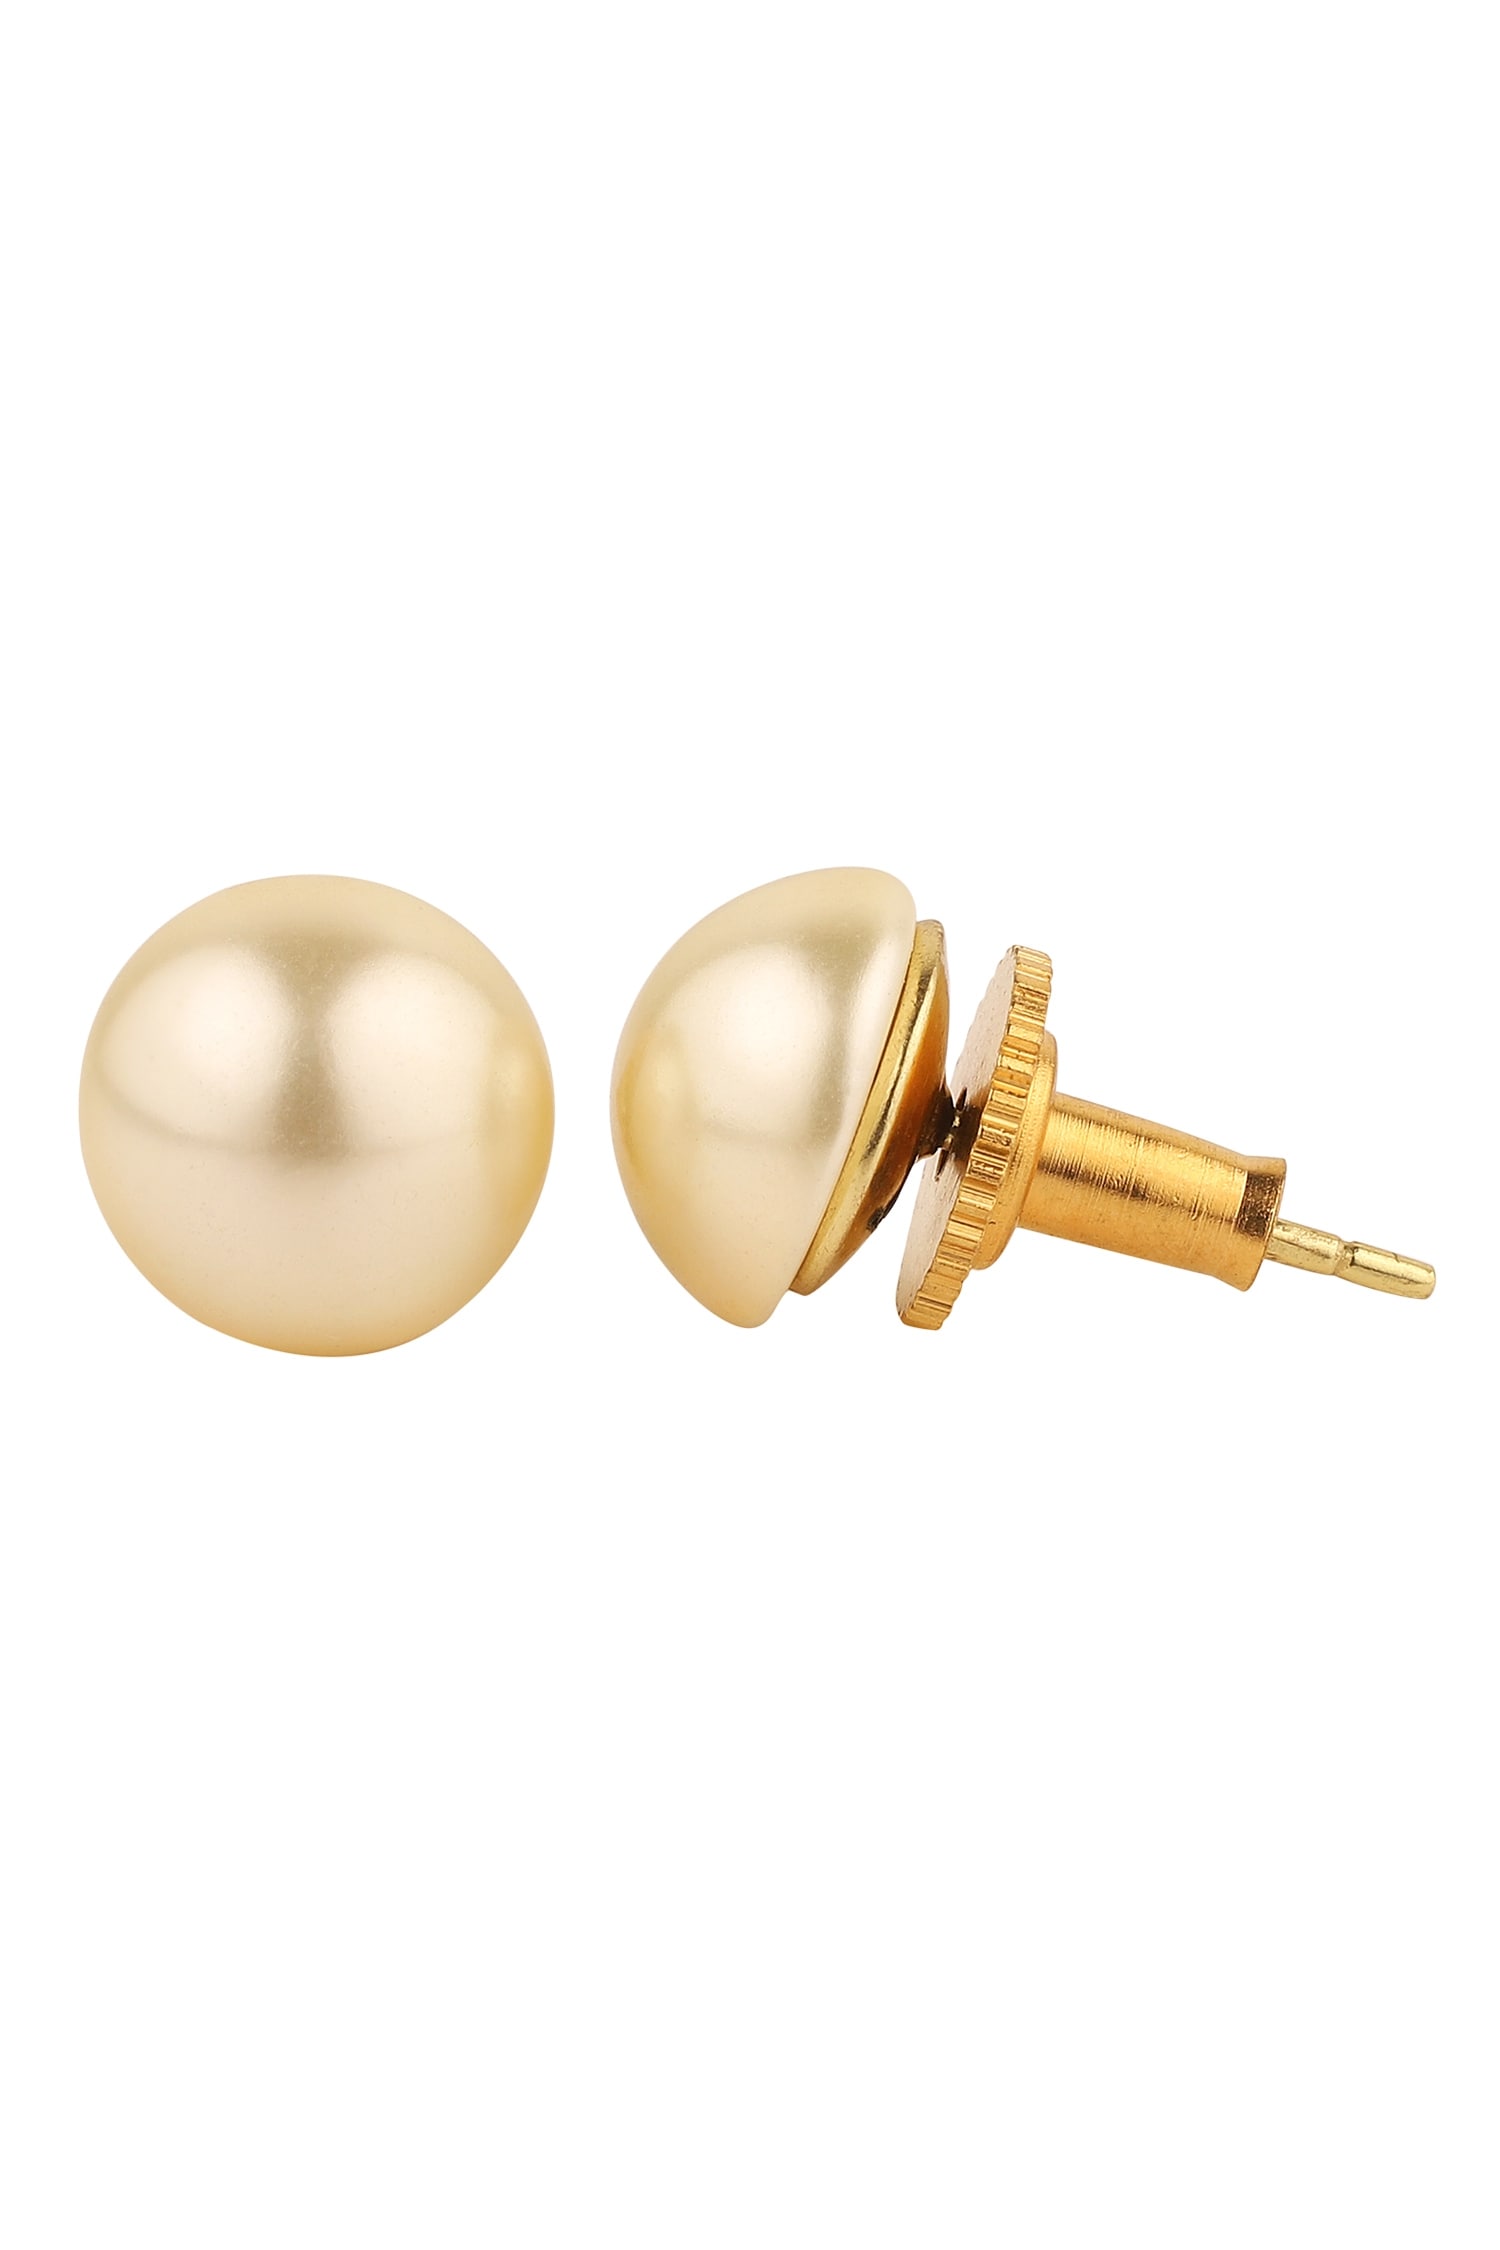 Estele Gold Plated Cotton Pearl Stud Earrings for Girls and Women Buy  Estele Gold Plated Cotton Pearl Stud Earrings for Girls and Women Online at  Best Price in India  Nykaa